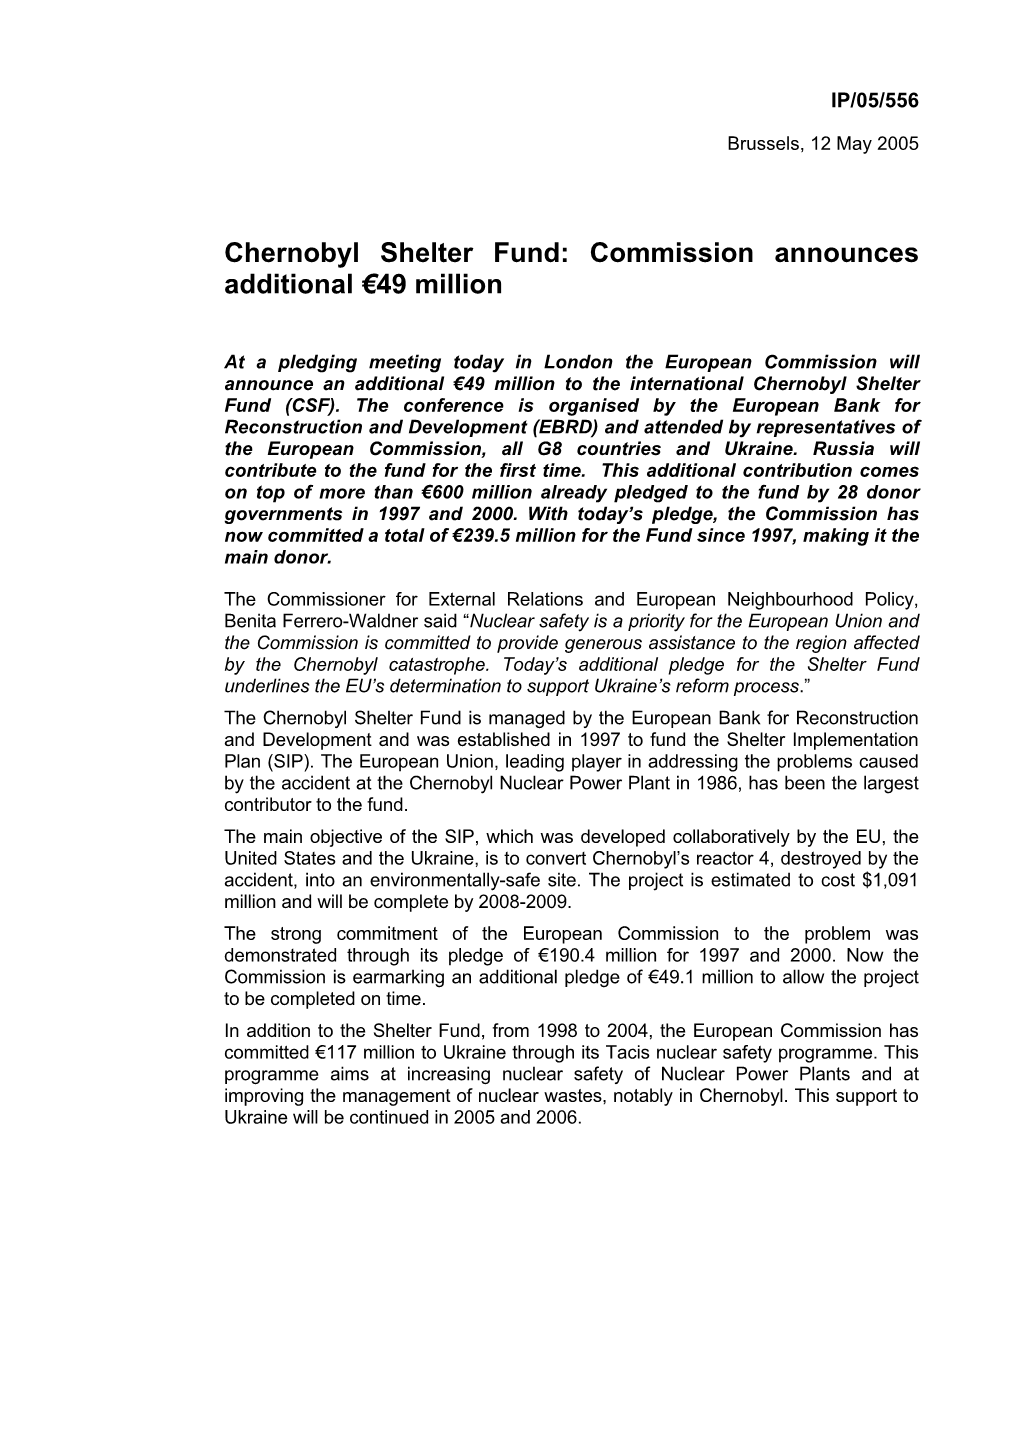 Chernobyl Shelter Fund: Commission Announces Additional €49 Million